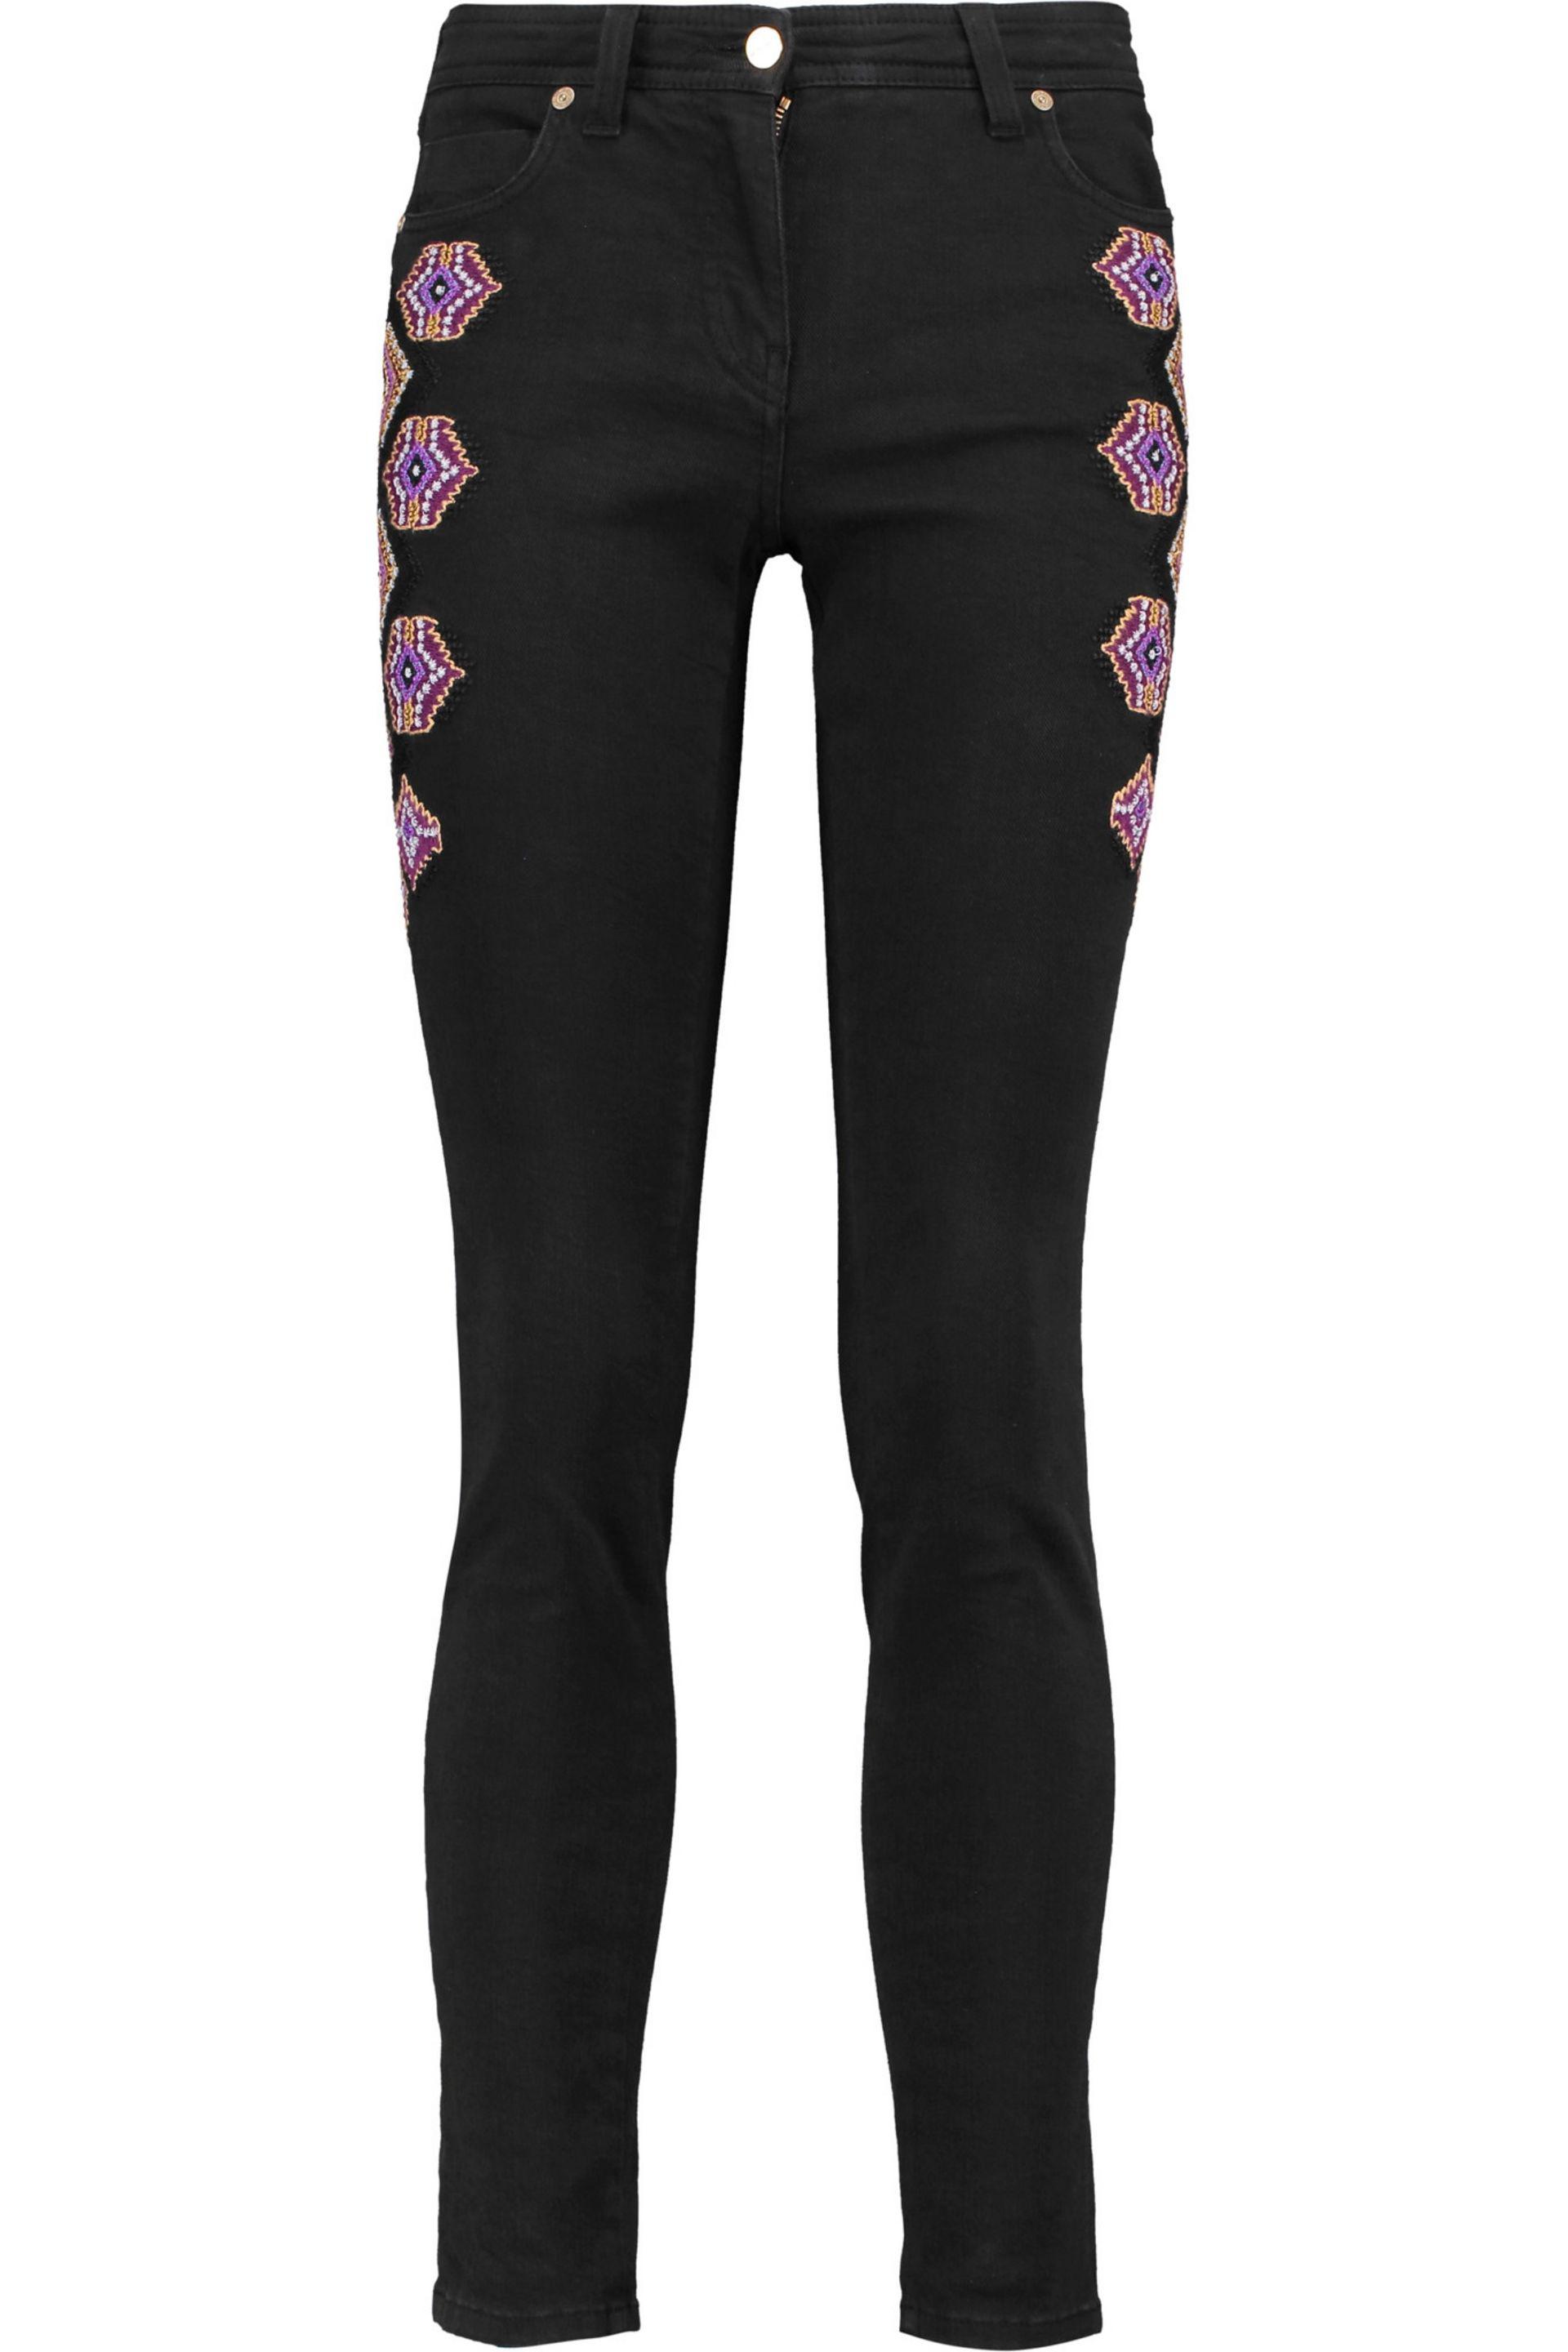 Lyst - Etro Mid-rise Embroidered Skinny Jeans in Black